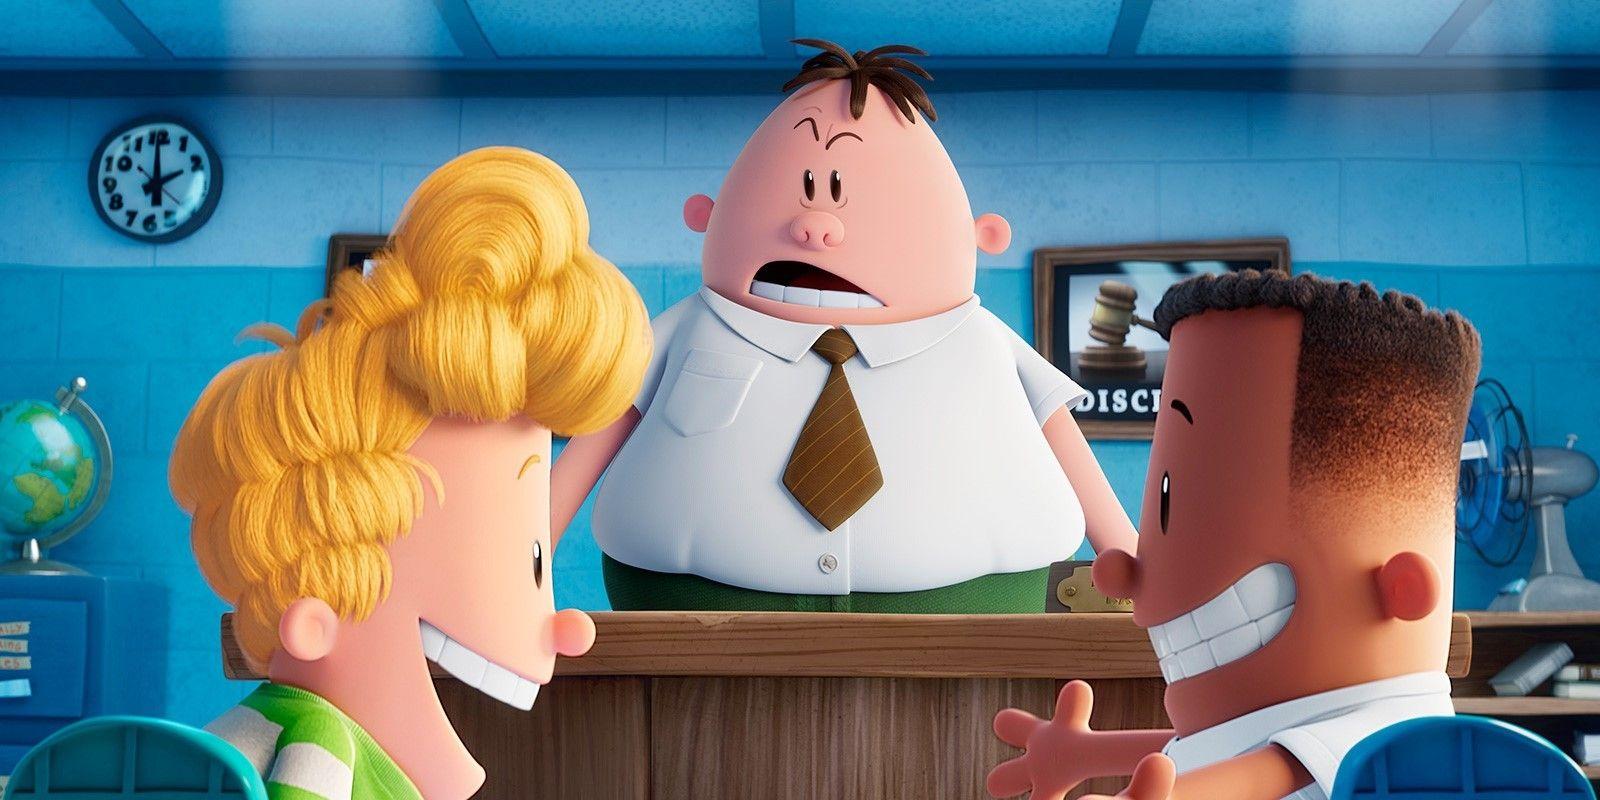 Captain Underpants: The First Epic Movie ReviewDC Filmdom